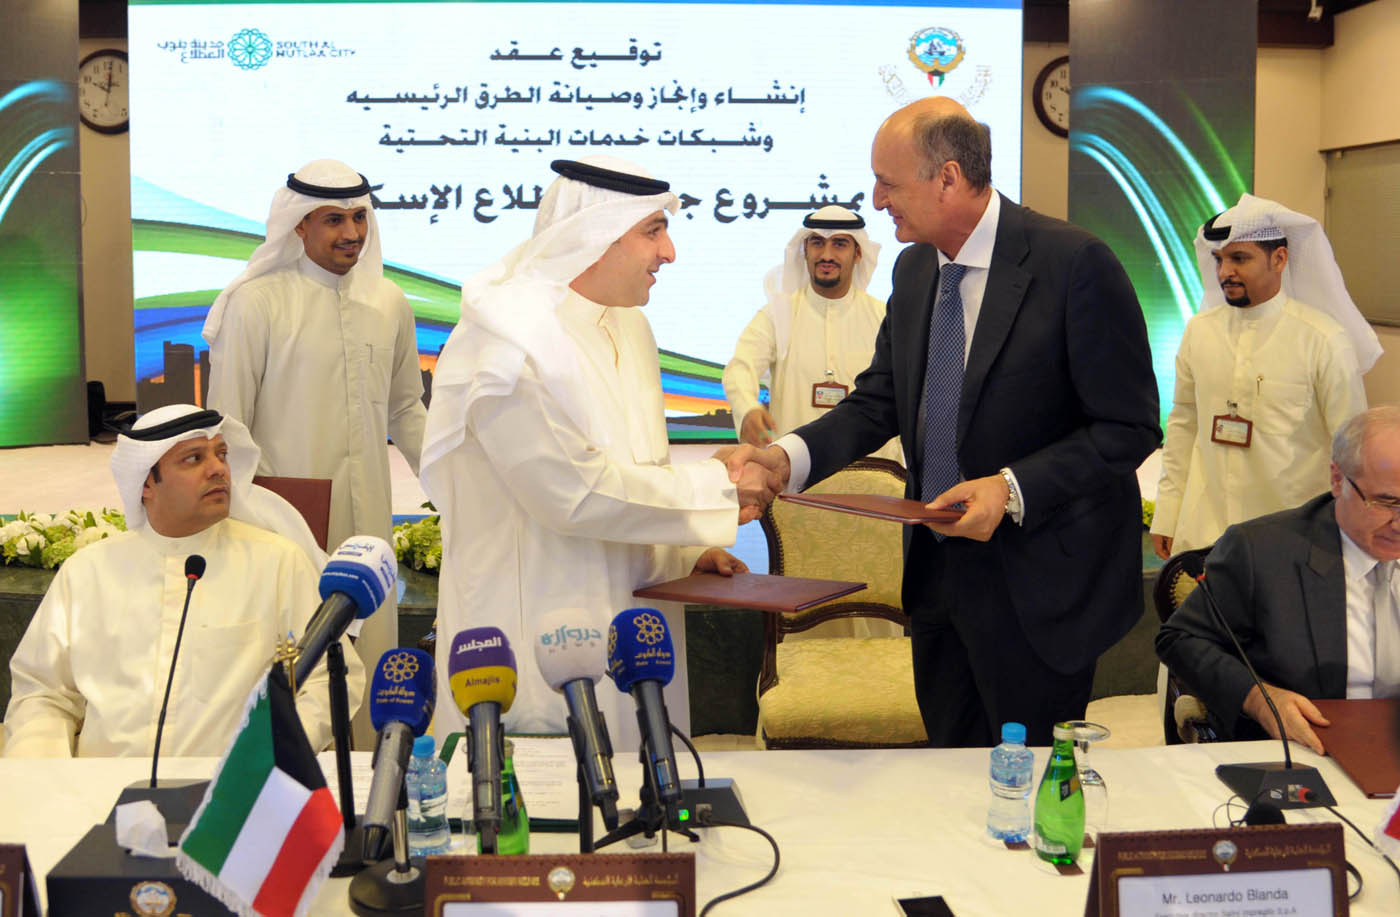 Minster of State for Housing Affairs Yasser Abel inked a contract with an international consortium co-led by the Italian Salini Costruttori engineering company and Turkey's Kolin group